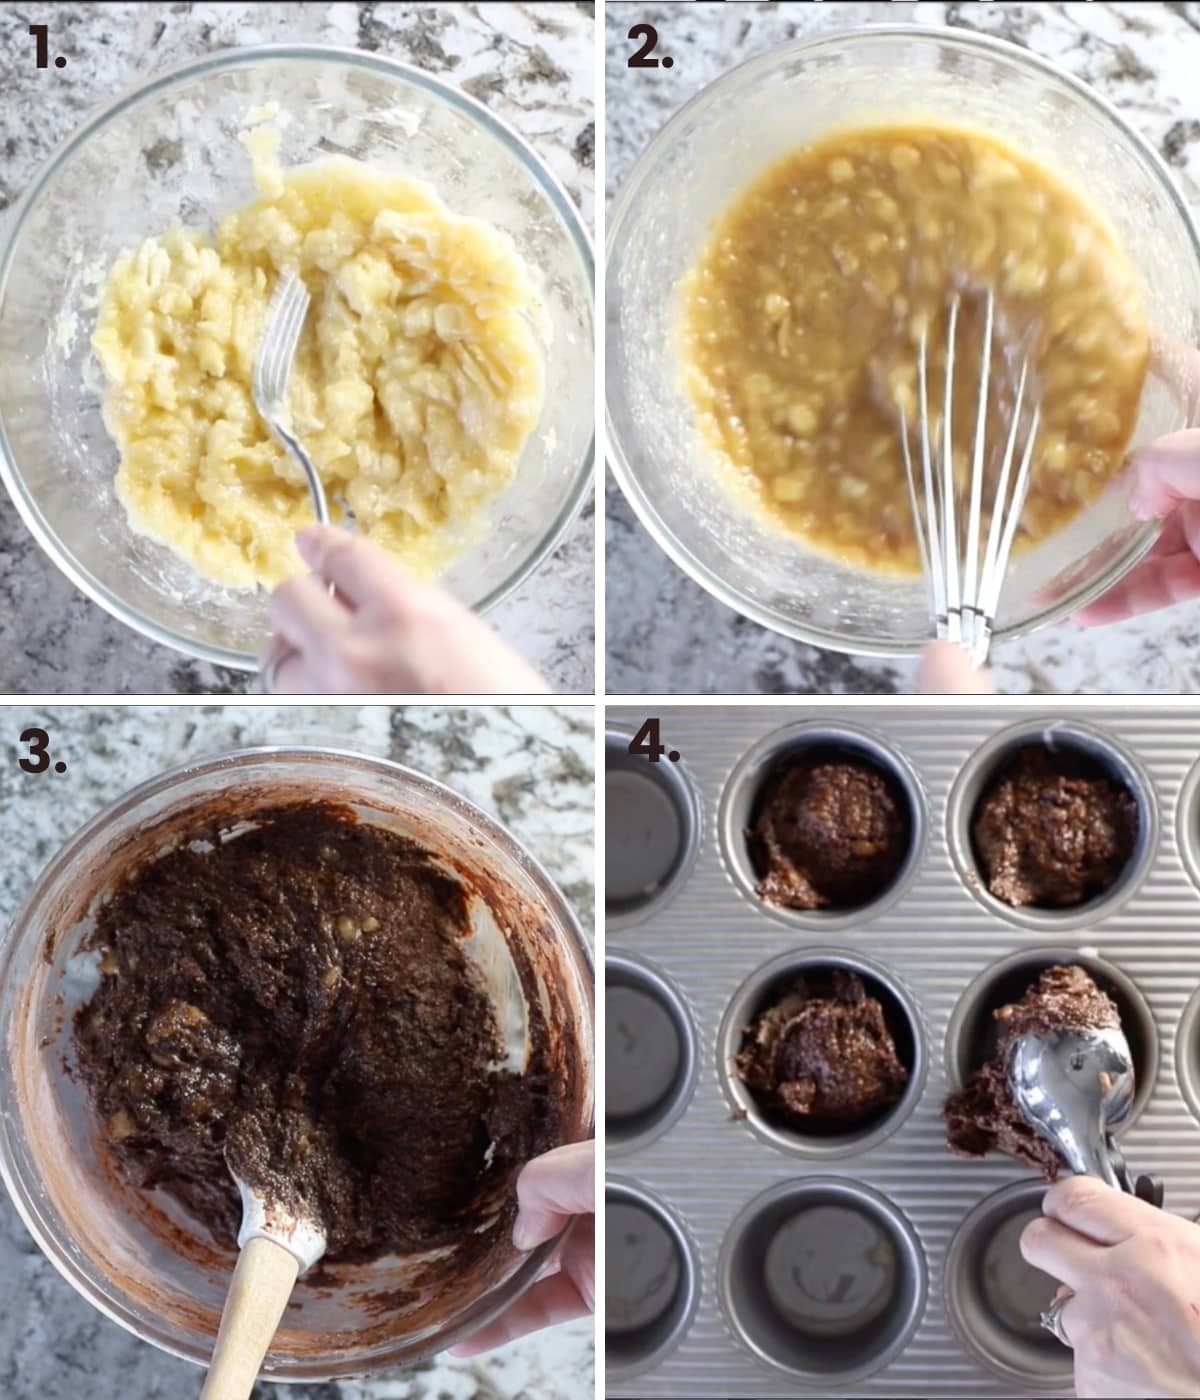 how to make the muffins step by step as per the written instructions